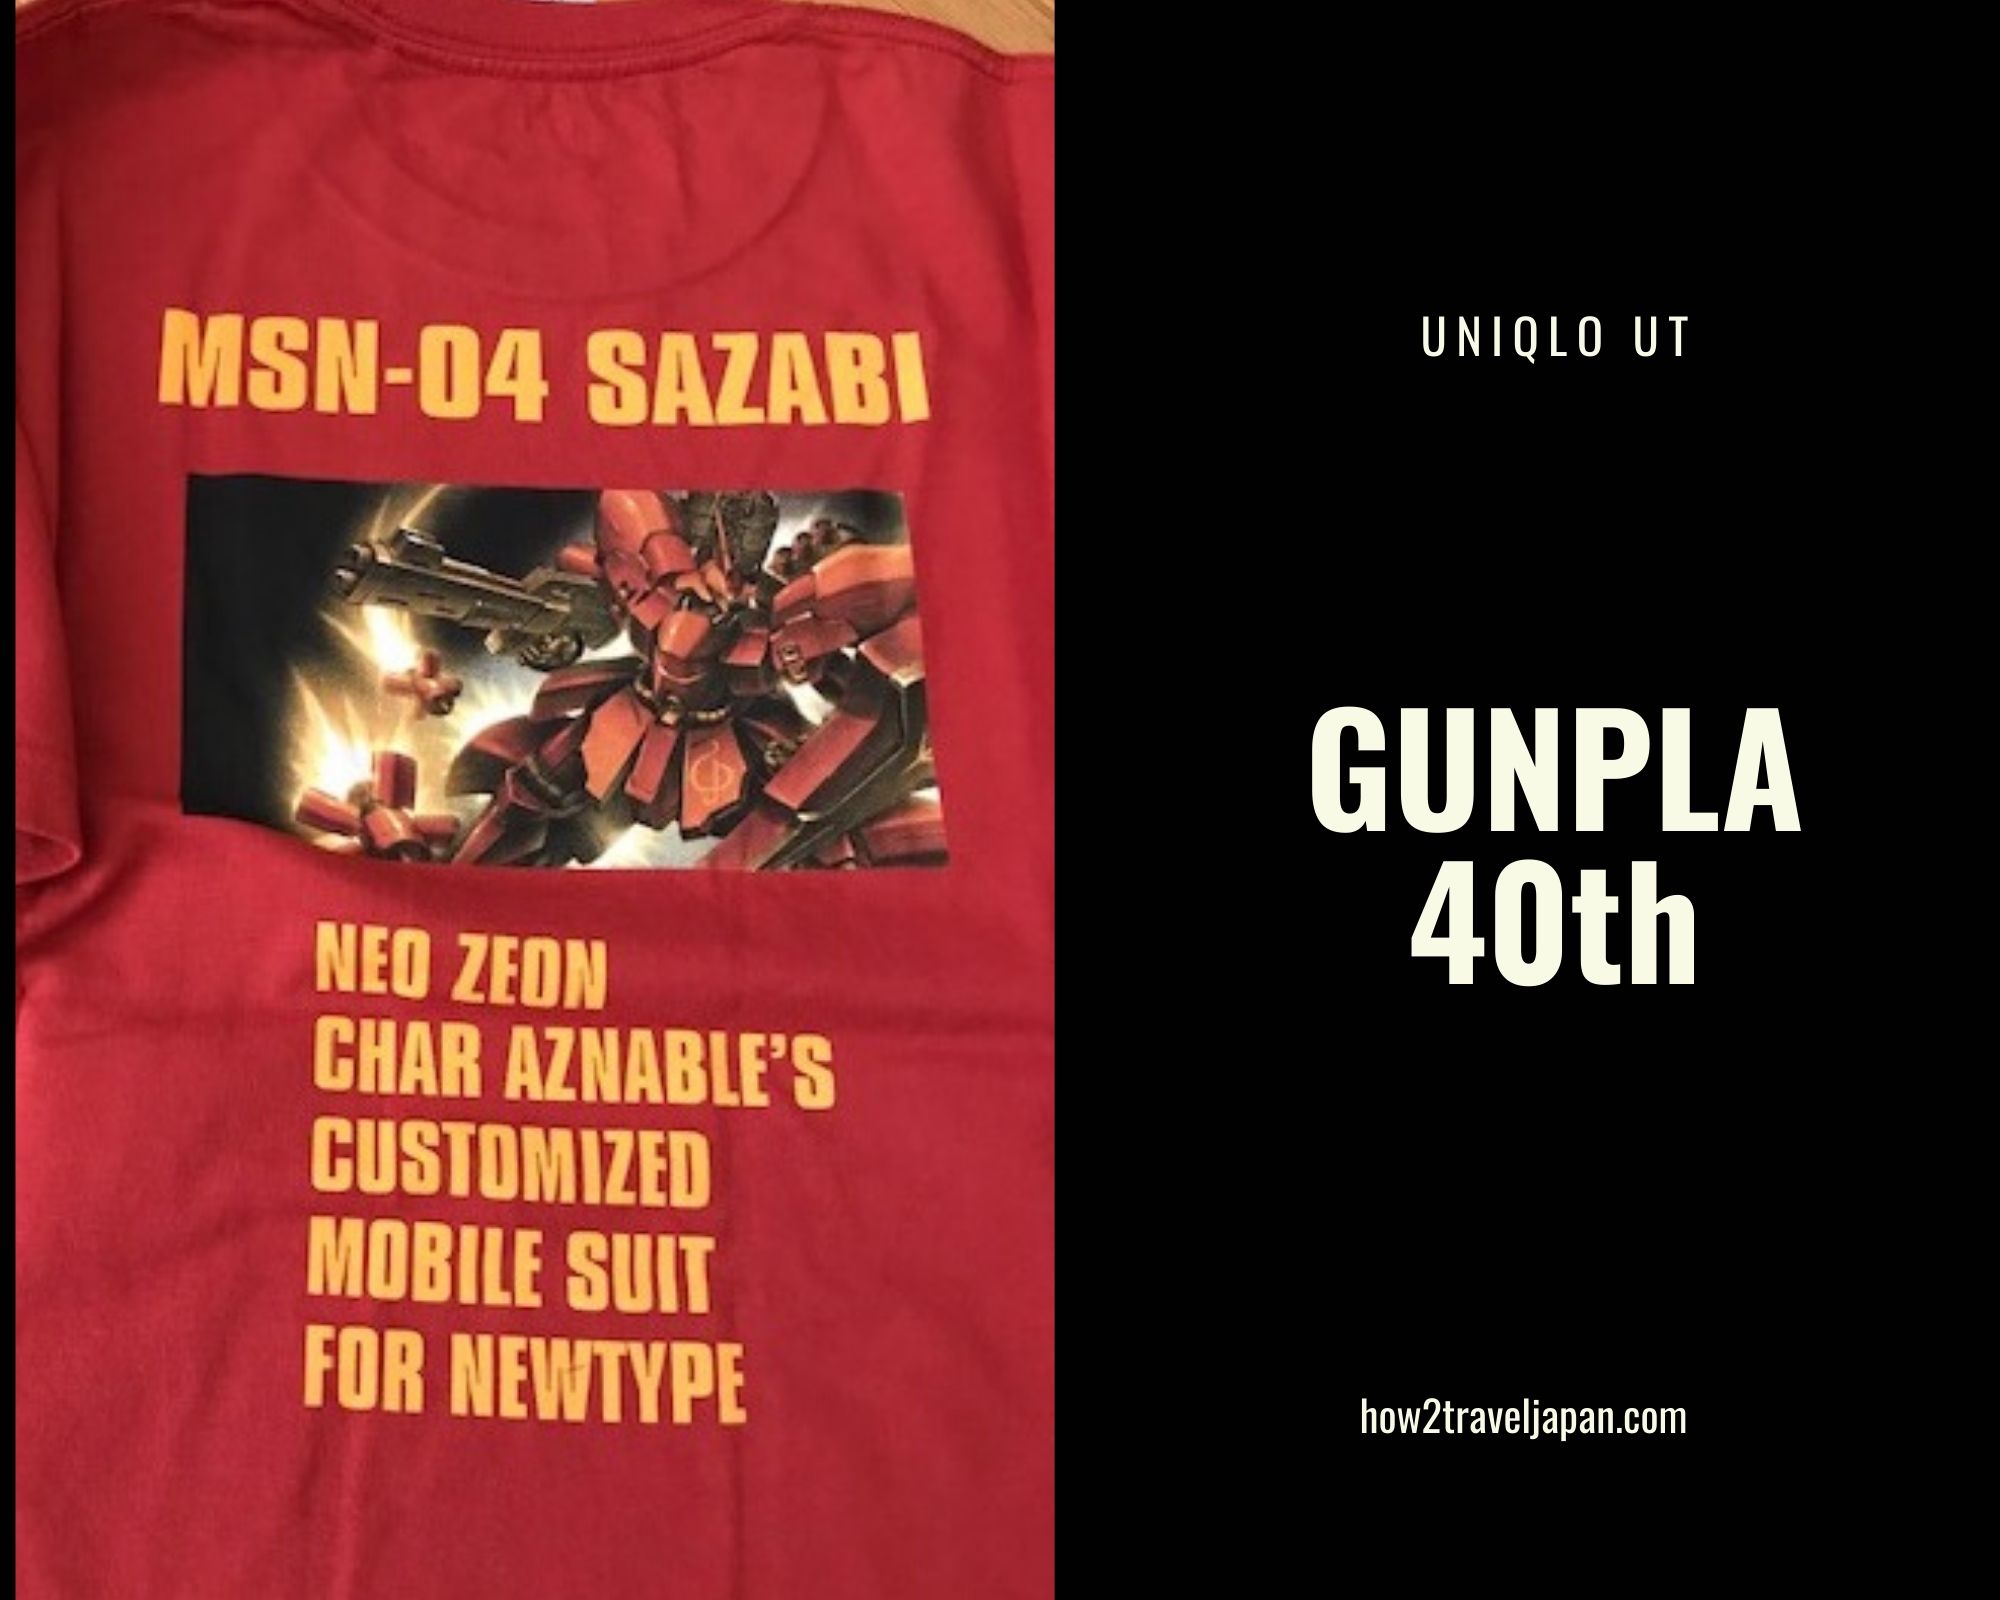 You are currently viewing GUNPLA 40TH ANNIVERSARY Uniqlo UT